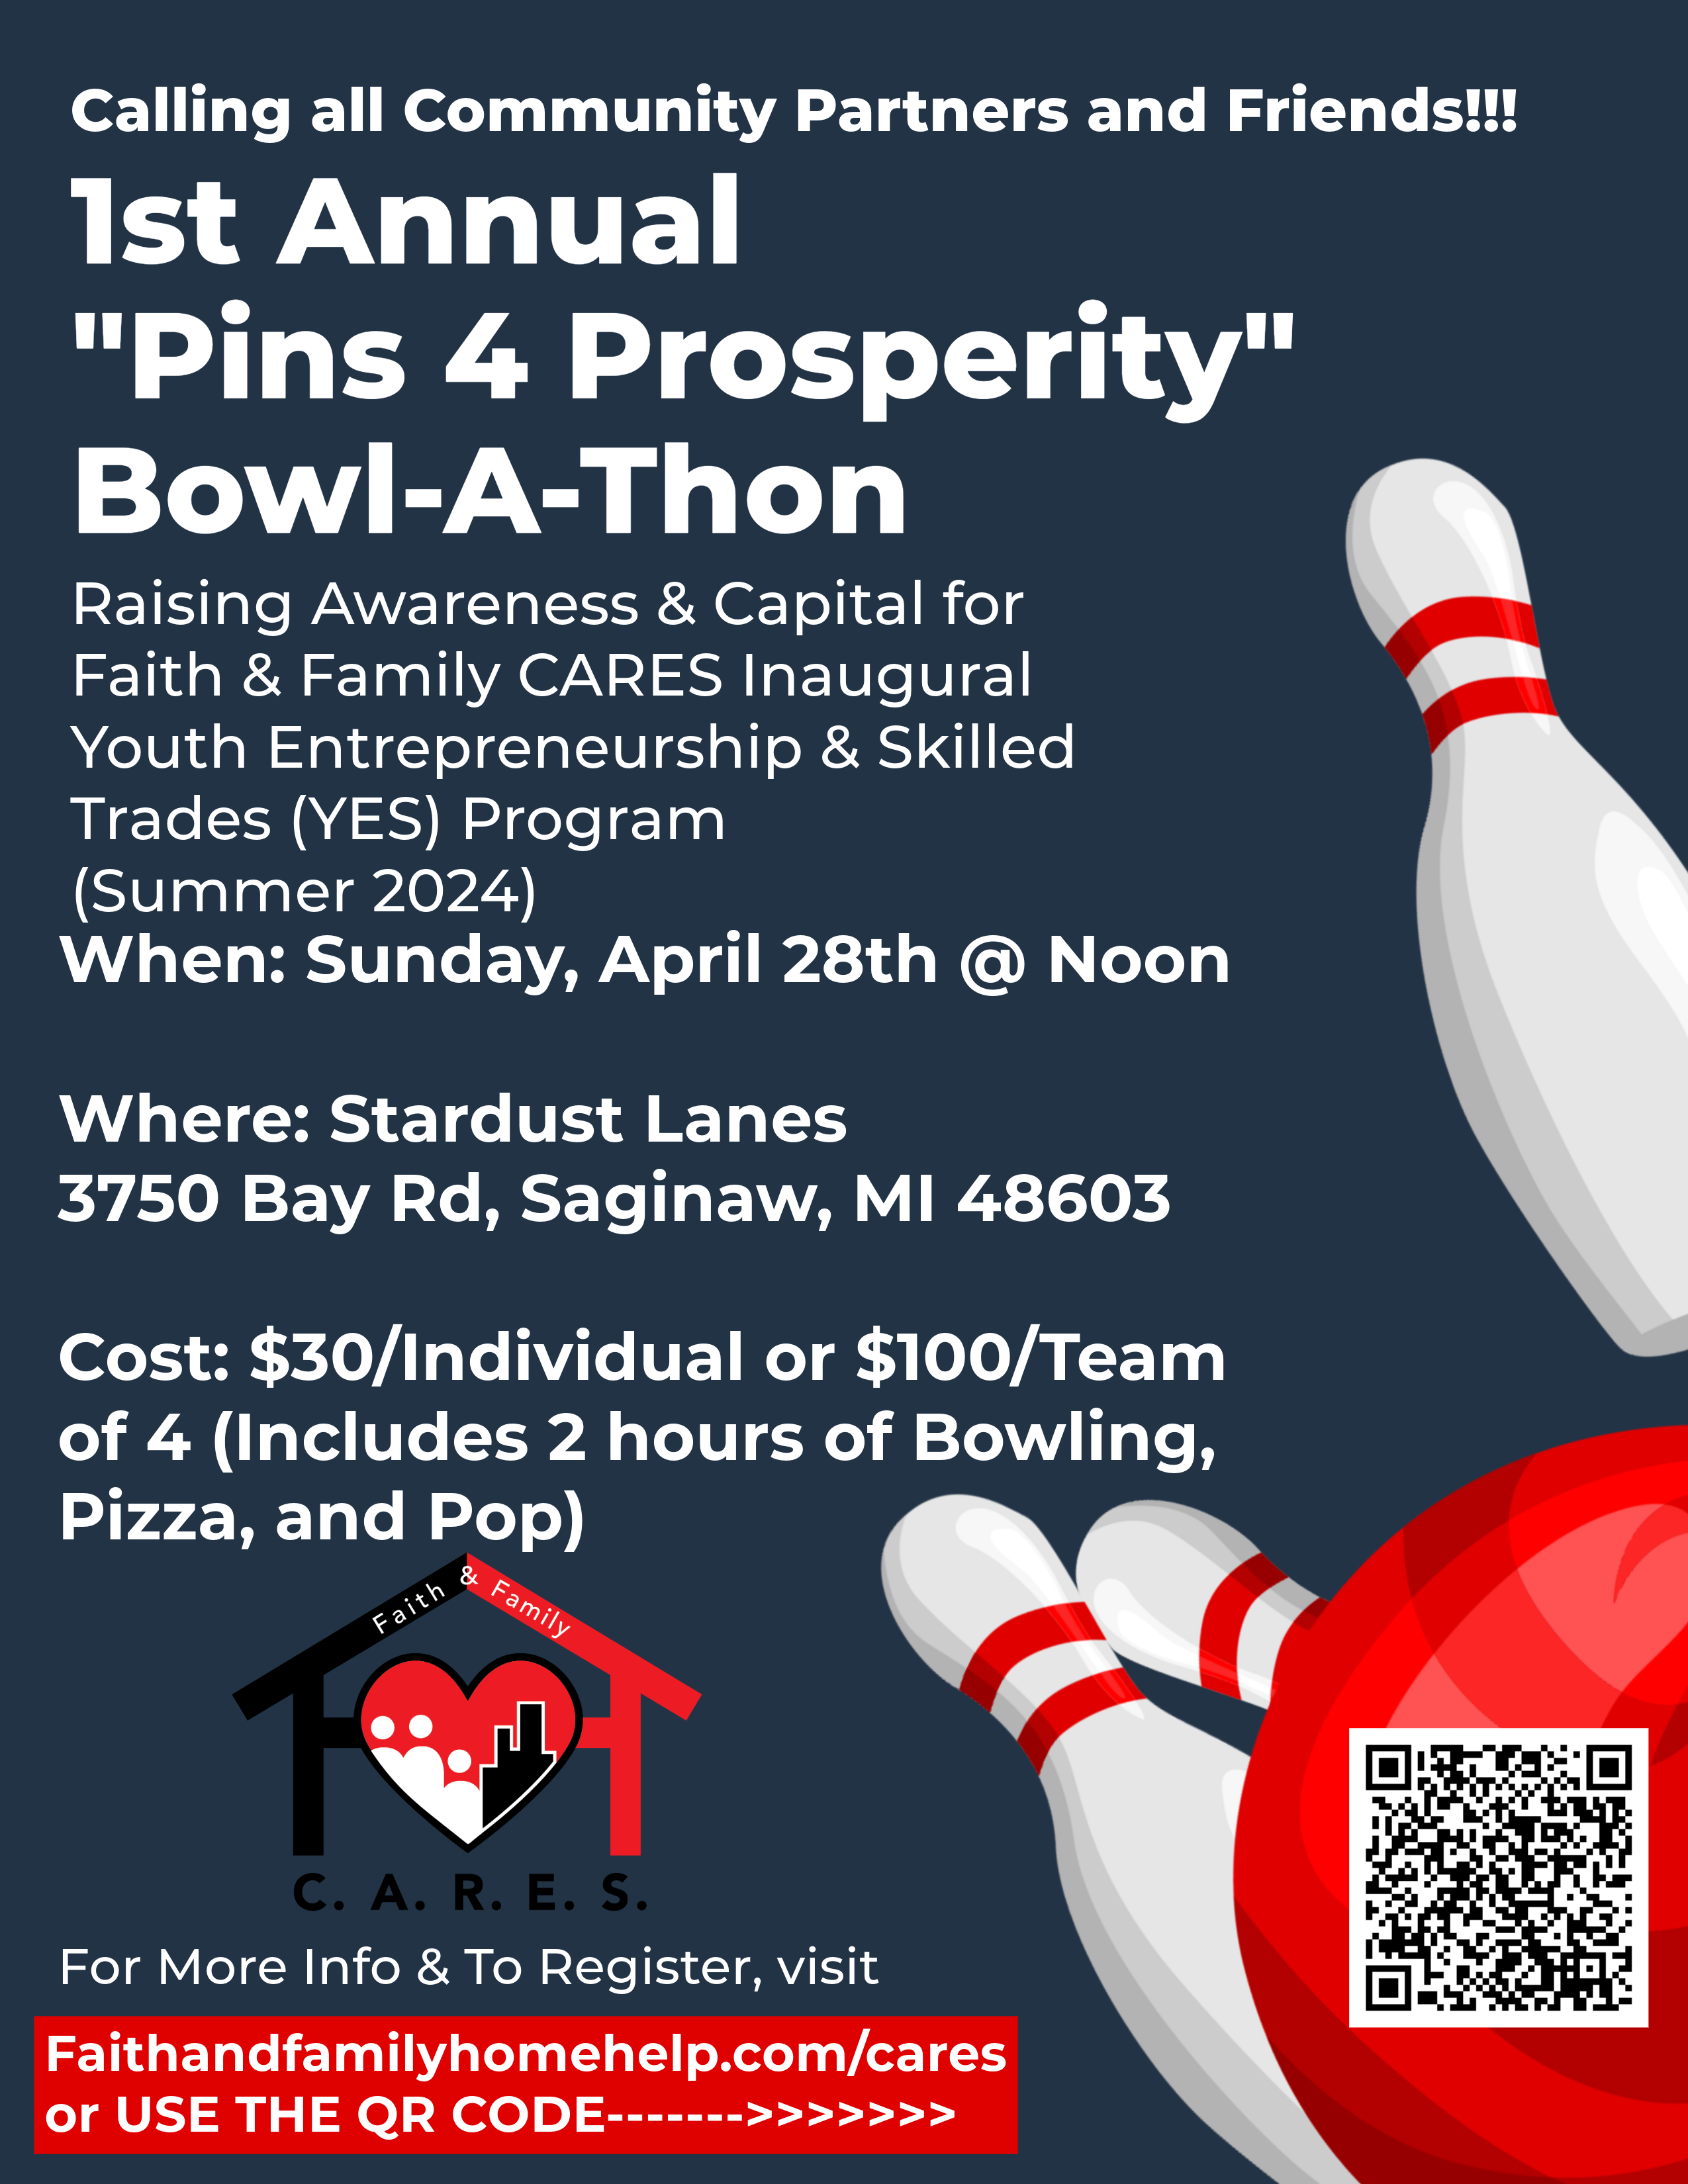 <h1 class="tribe-events-single-event-title">1st Annual “Pins 4 Prosperity” Bowl-A-Thon @ Stardust Lanes!</h1>